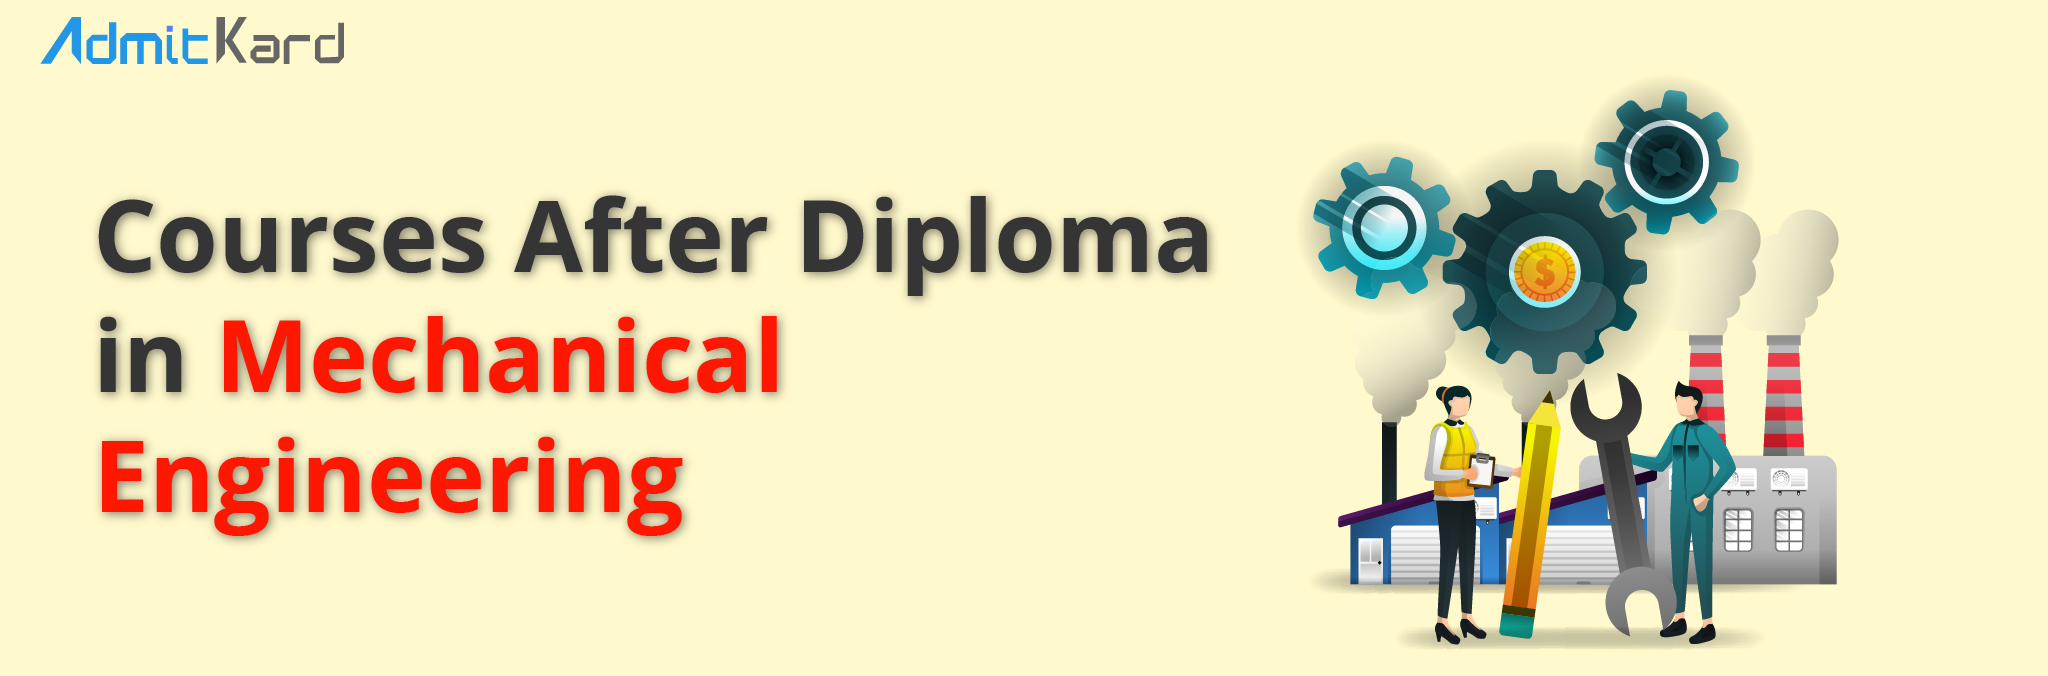 courses after diploma in mechanical engineering